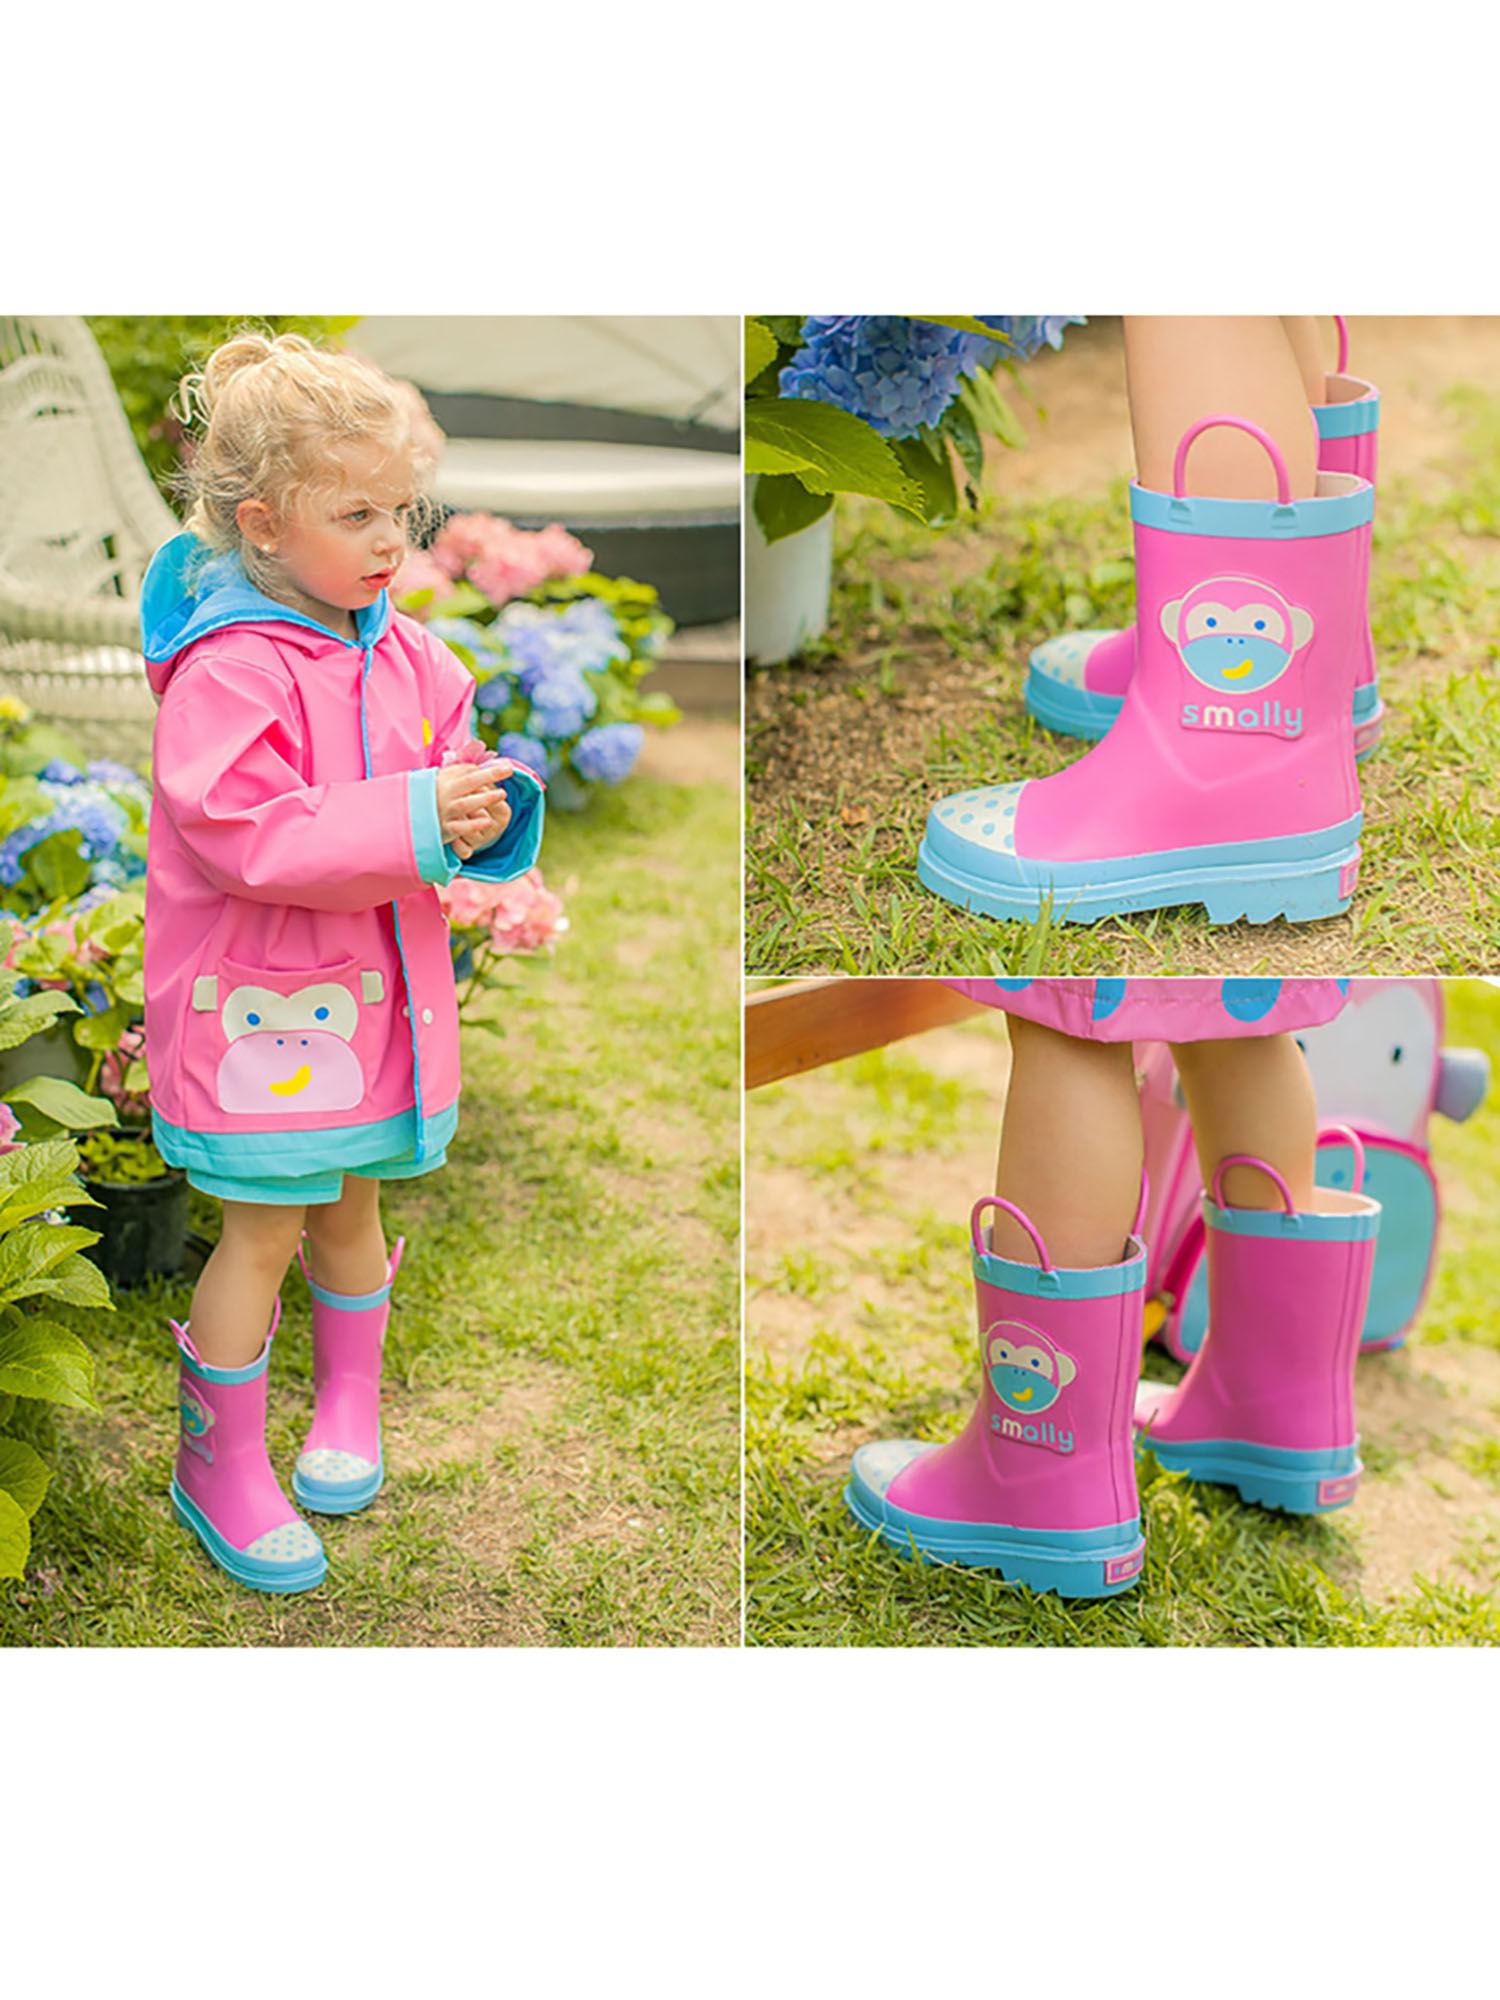 pink monkey flexible rubber rain gumboots for toddlers